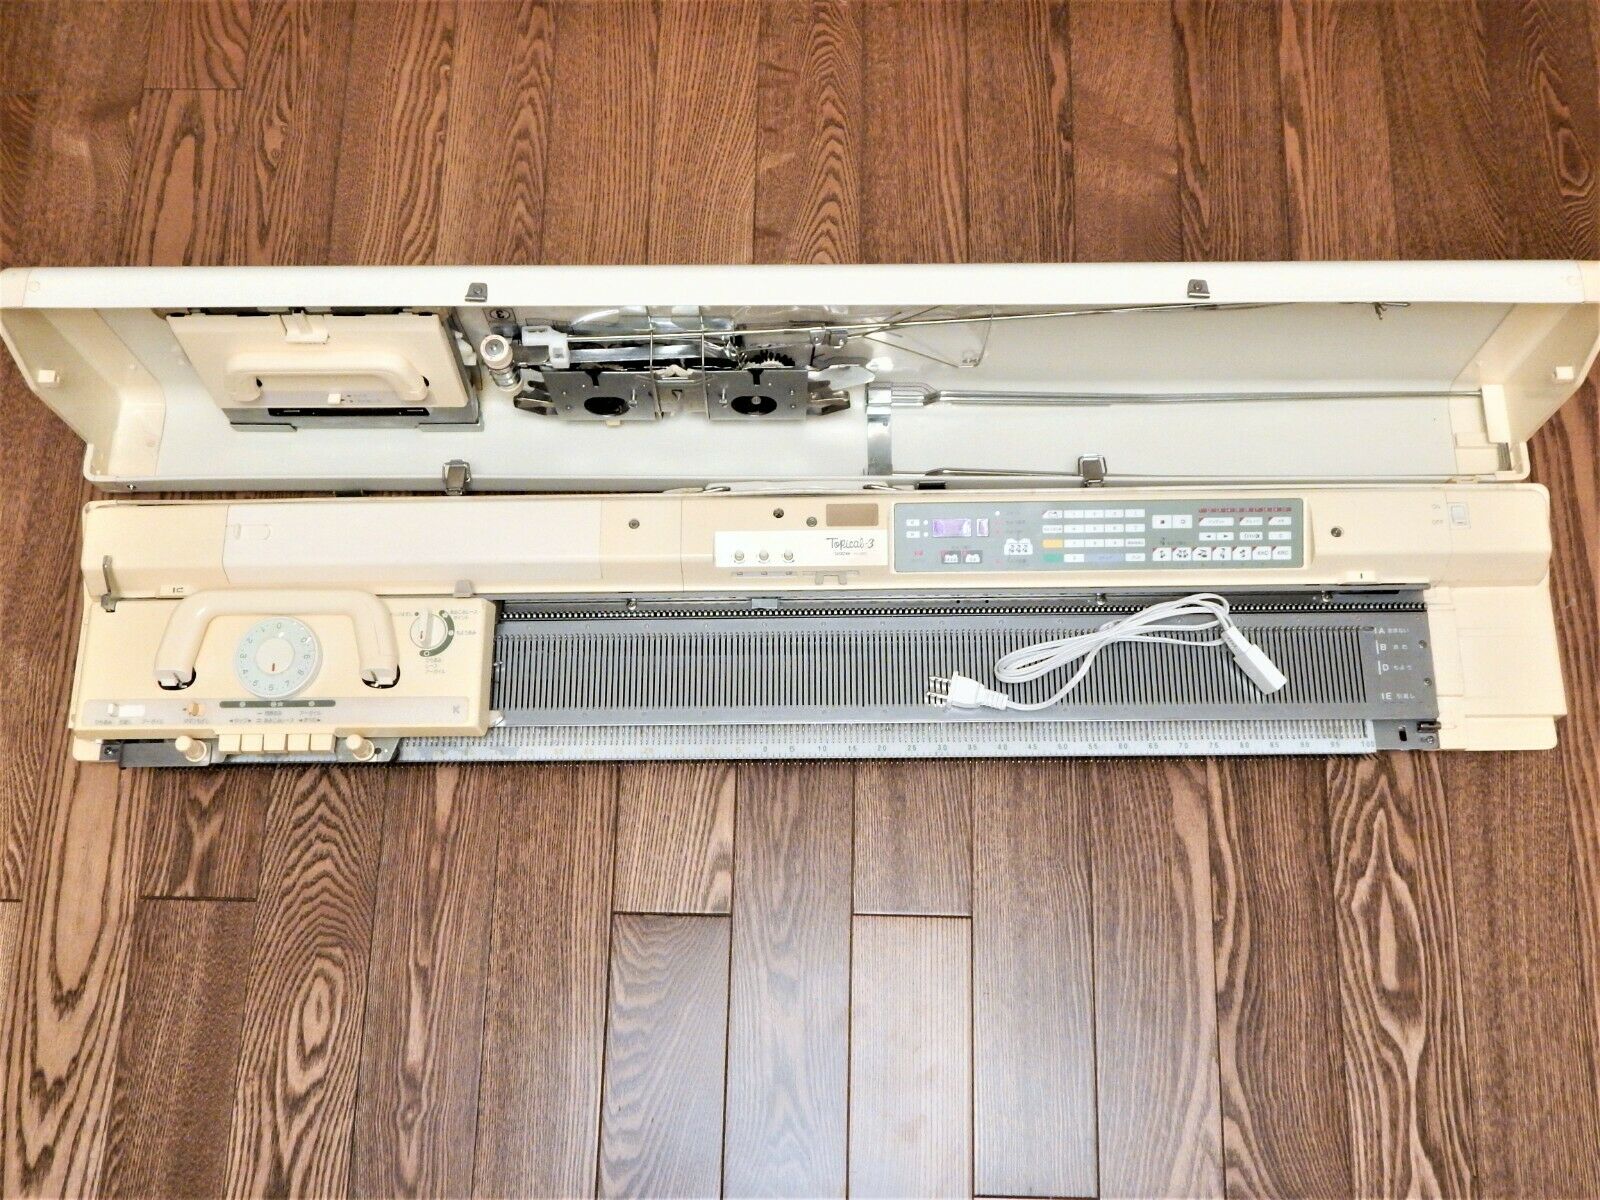 Brother/Knitking IV KH940 | Knitting Machine